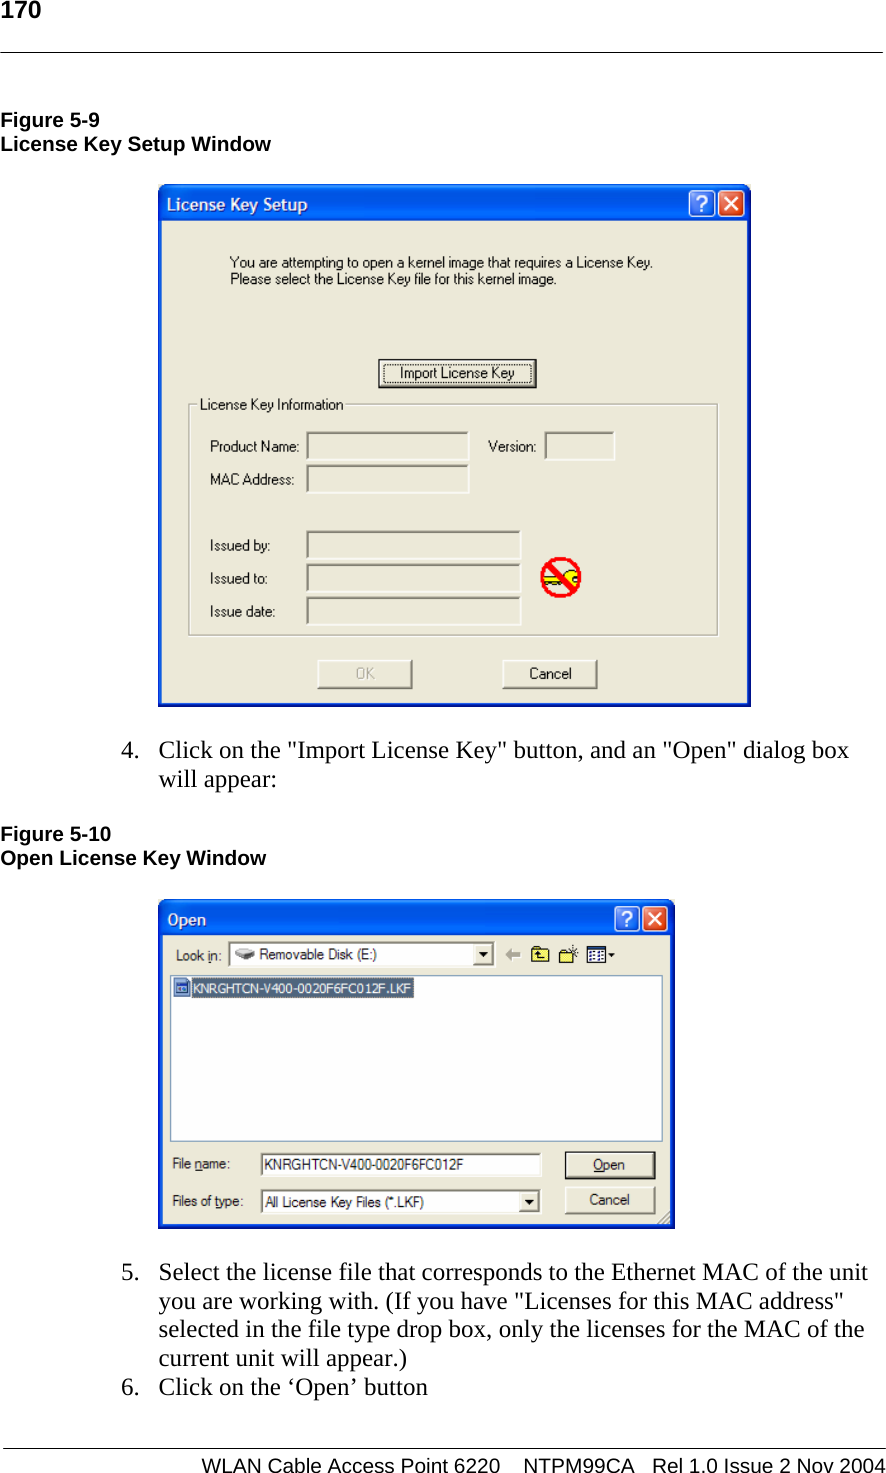   170    WLAN Cable Access Point 6220    NTPM99CA   Rel 1.0 Issue 2 Nov 2004 Figure 5-9 License Key Setup Window   4. Click on the &quot;Import License Key&quot; button, and an &quot;Open&quot; dialog box will appear: Figure 5-10 Open License Key Window  5. Select the license file that corresponds to the Ethernet MAC of the unit you are working with. (If you have &quot;Licenses for this MAC address&quot; selected in the file type drop box, only the licenses for the MAC of the current unit will appear.) 6. Click on the ‘Open’ button 